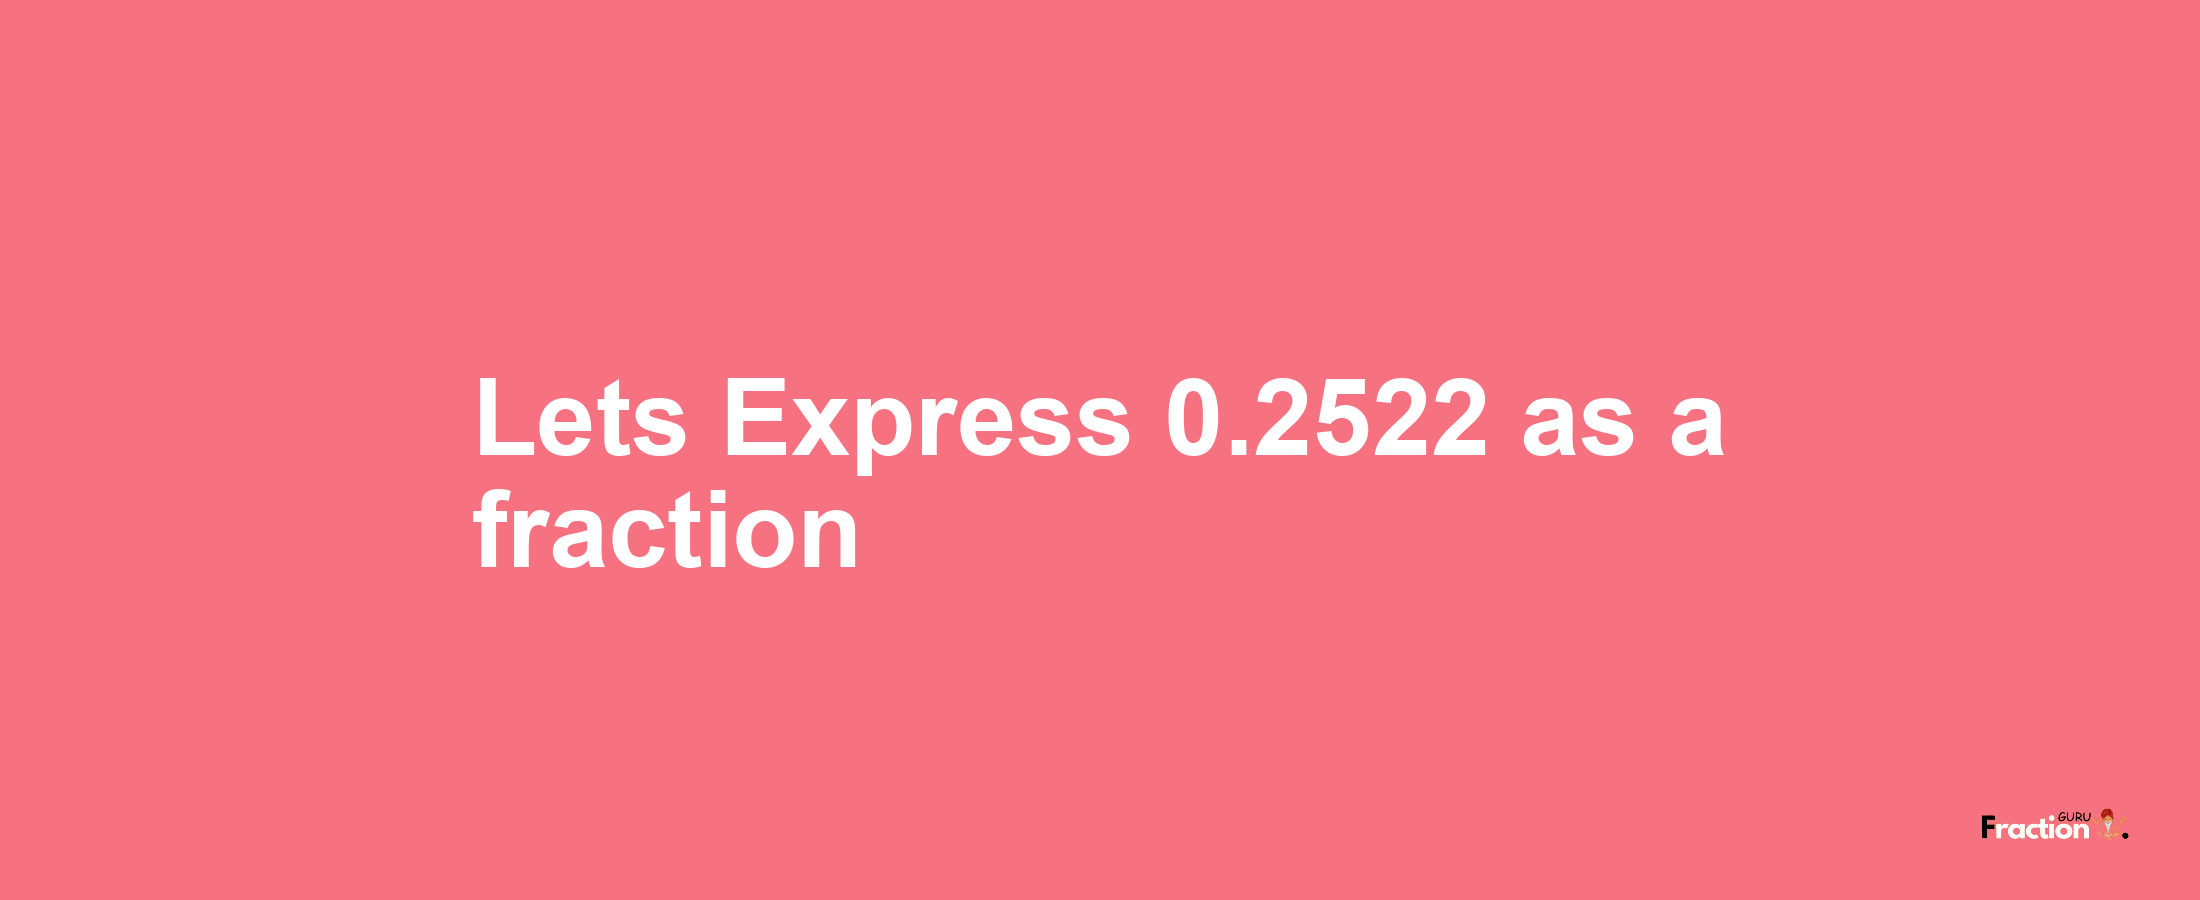 Lets Express 0.2522 as afraction